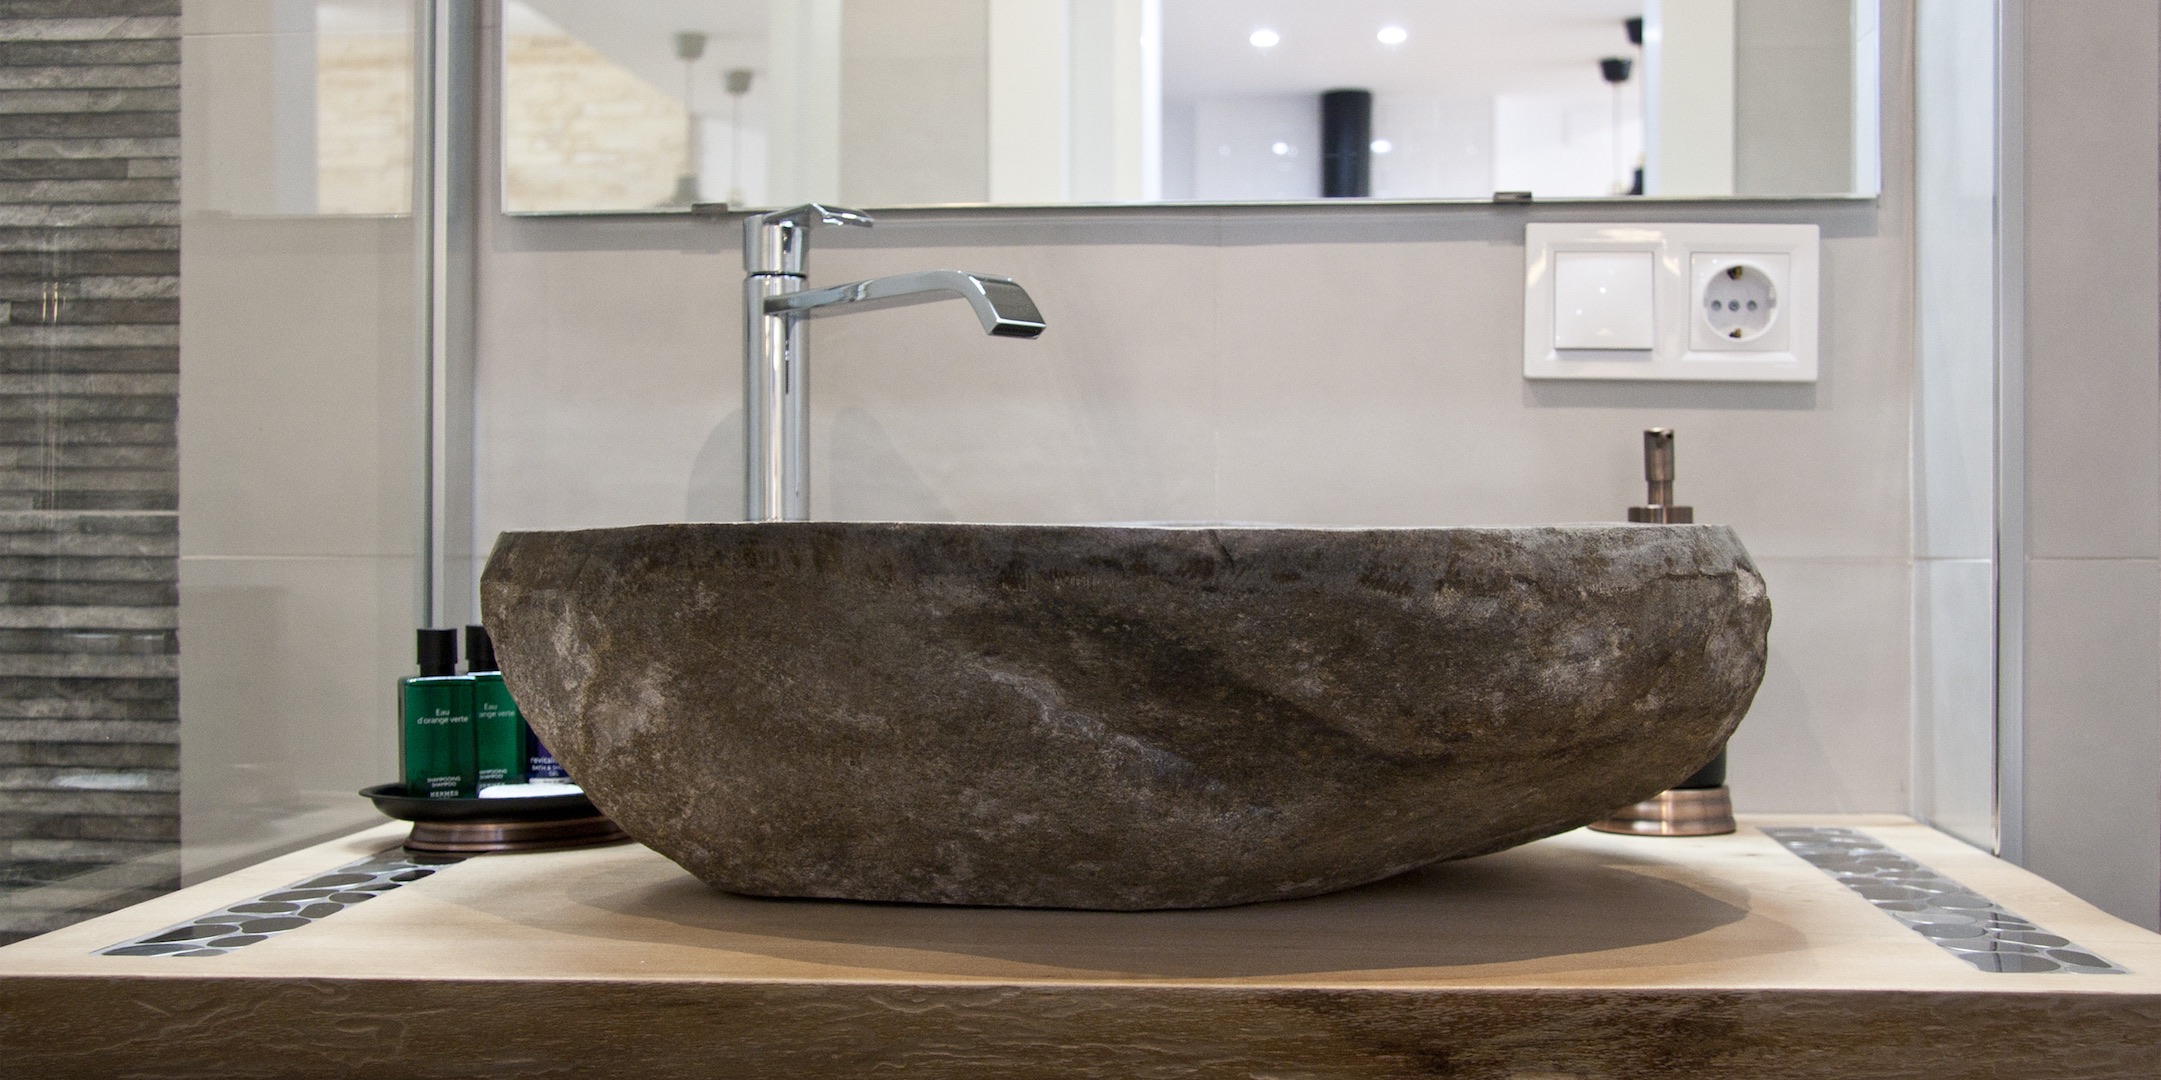 Natural stone sink